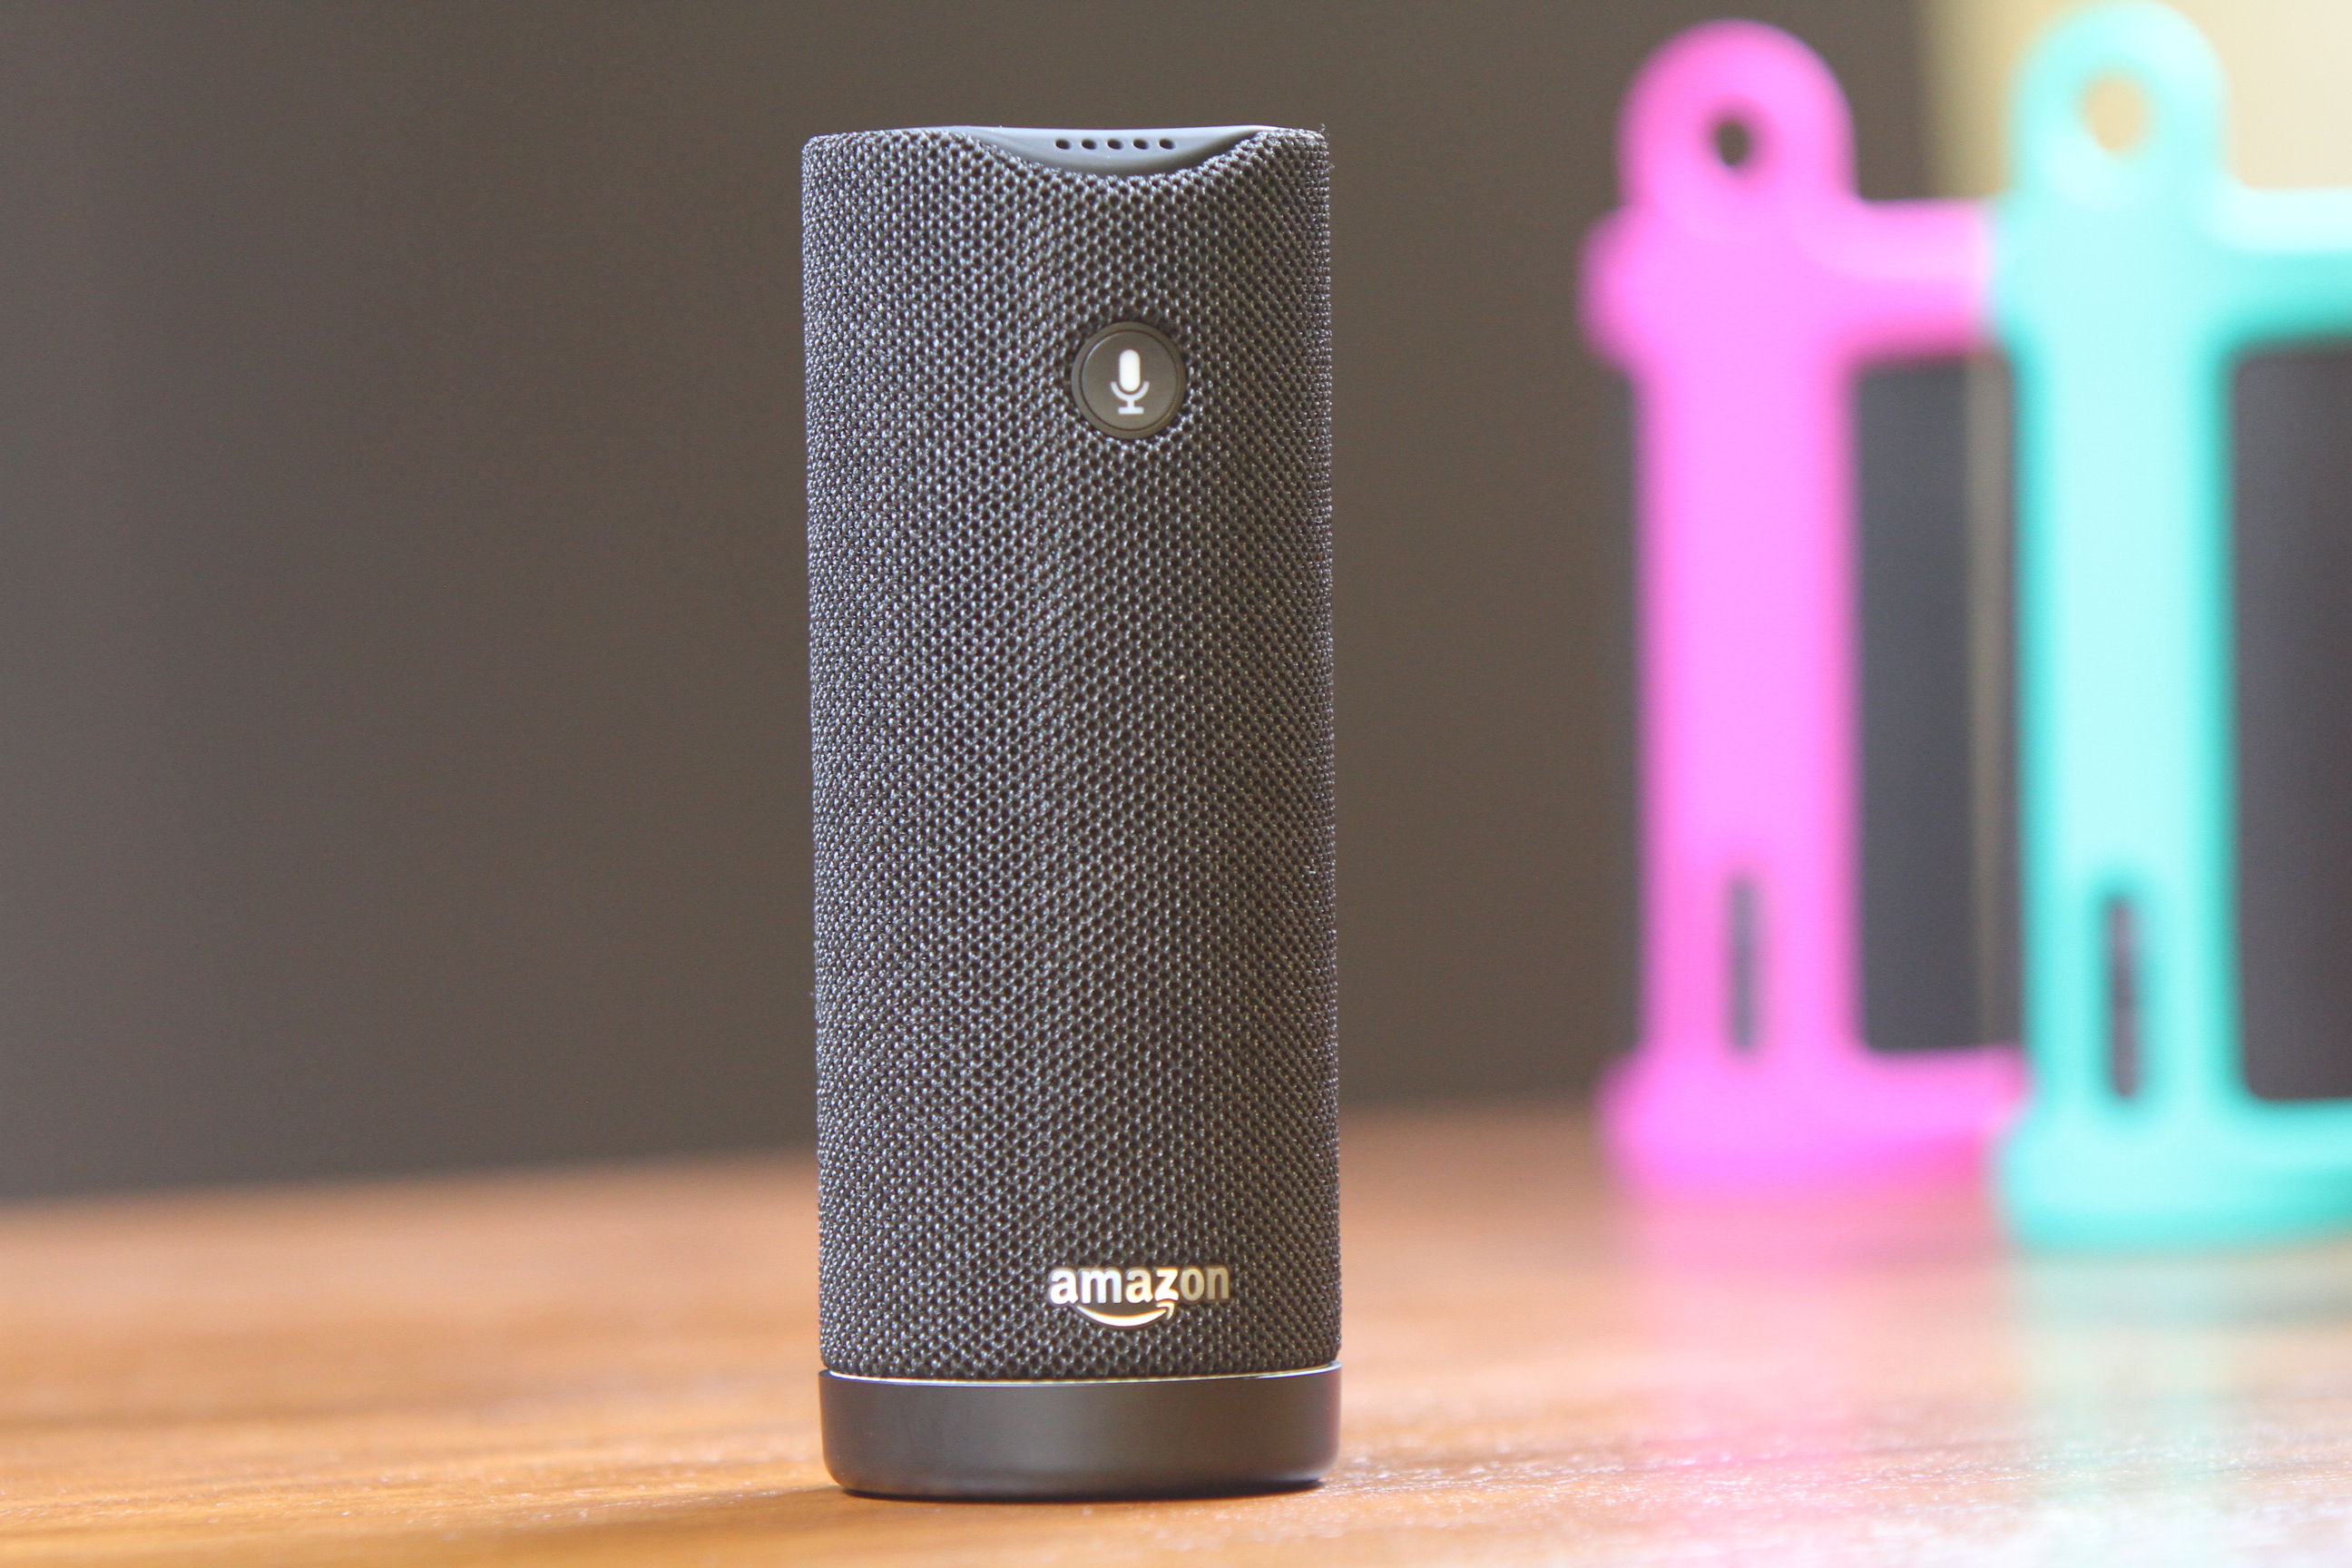 Amazon Tap: A smaller Echo device that's portable and Alexa-enabled.